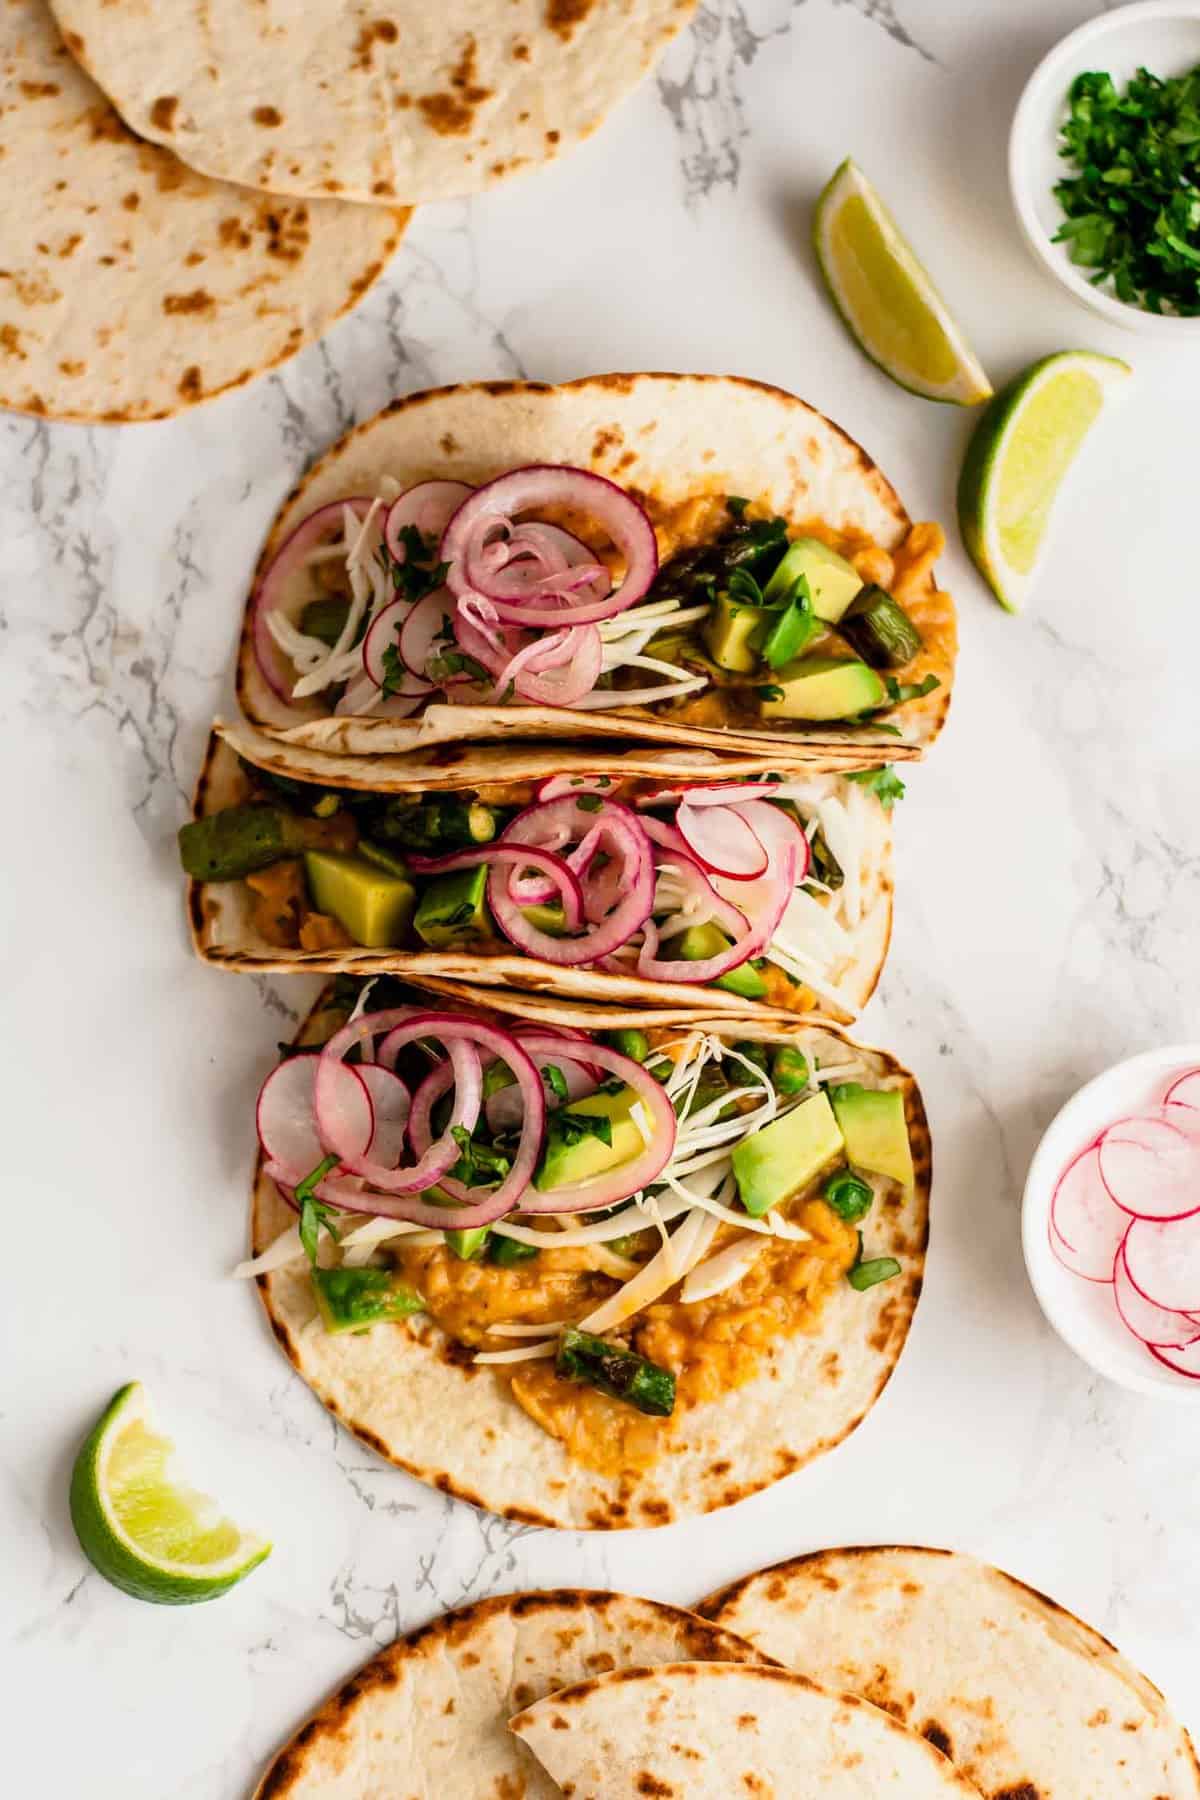 Three vegan tacos with refried beans and asparagus with pickled onions on top.